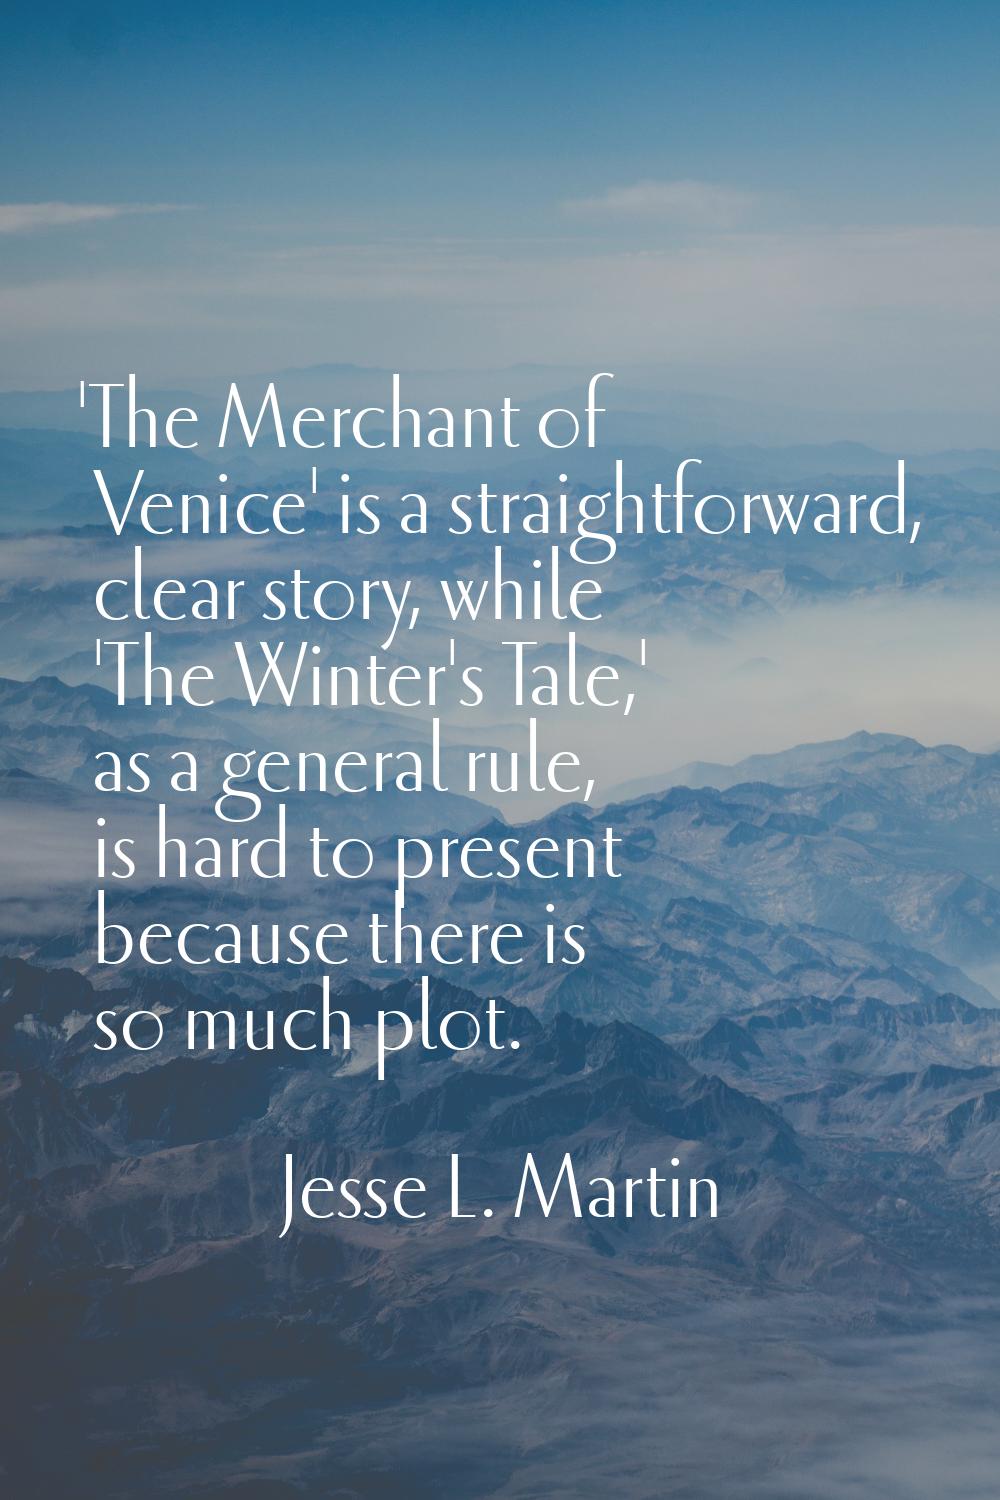 'The Merchant of Venice' is a straightforward, clear story, while 'The Winter's Tale,' as a general